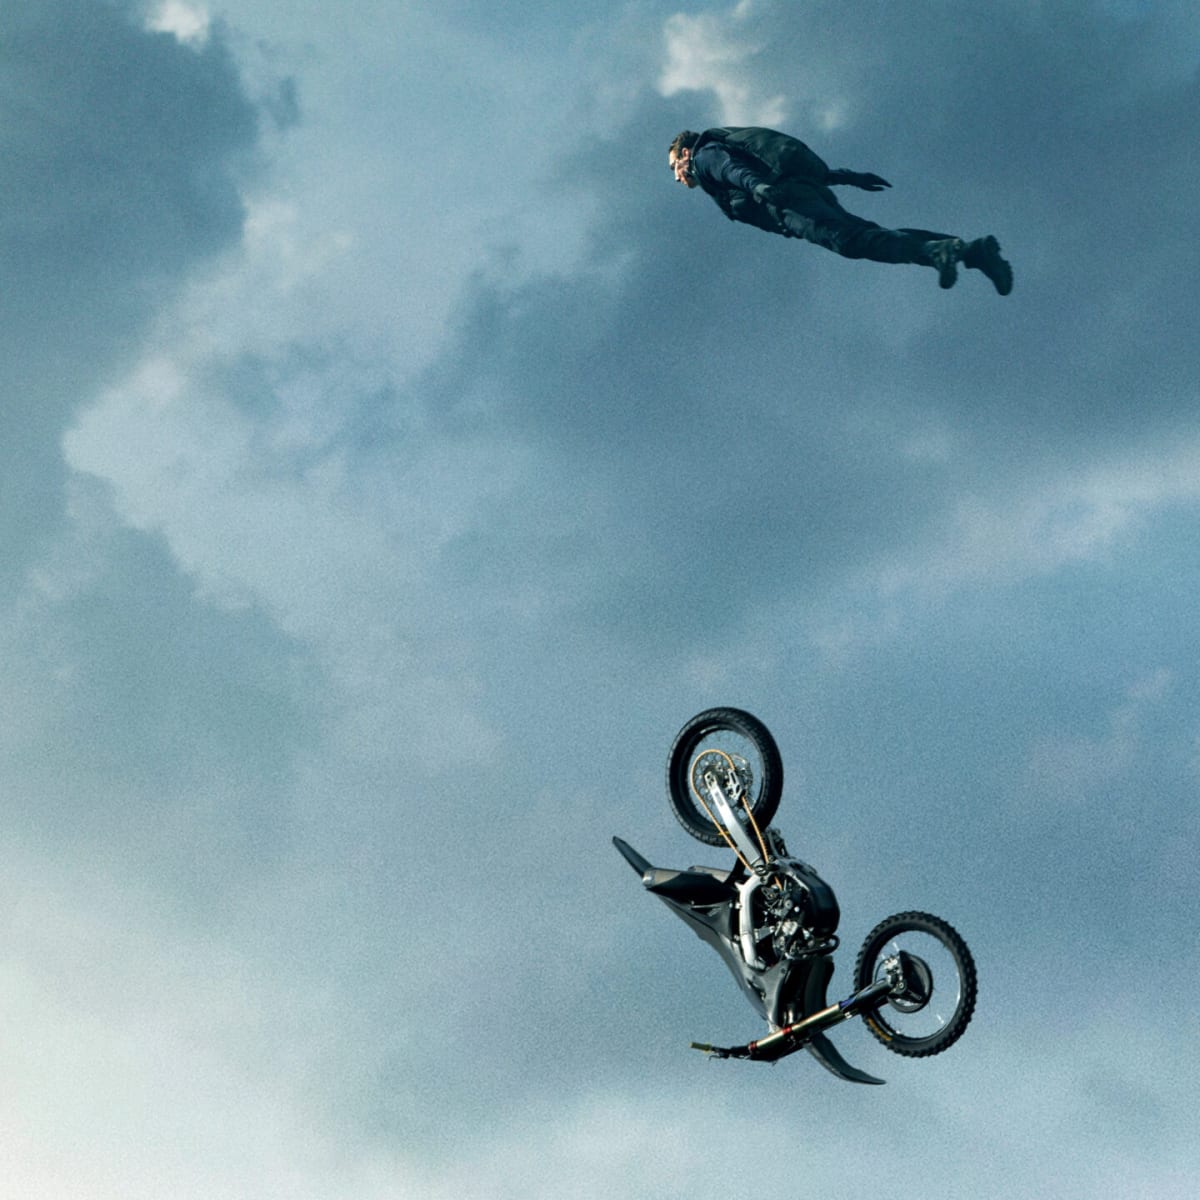 Tom Cruise pulls off another insane stunt in new Mission